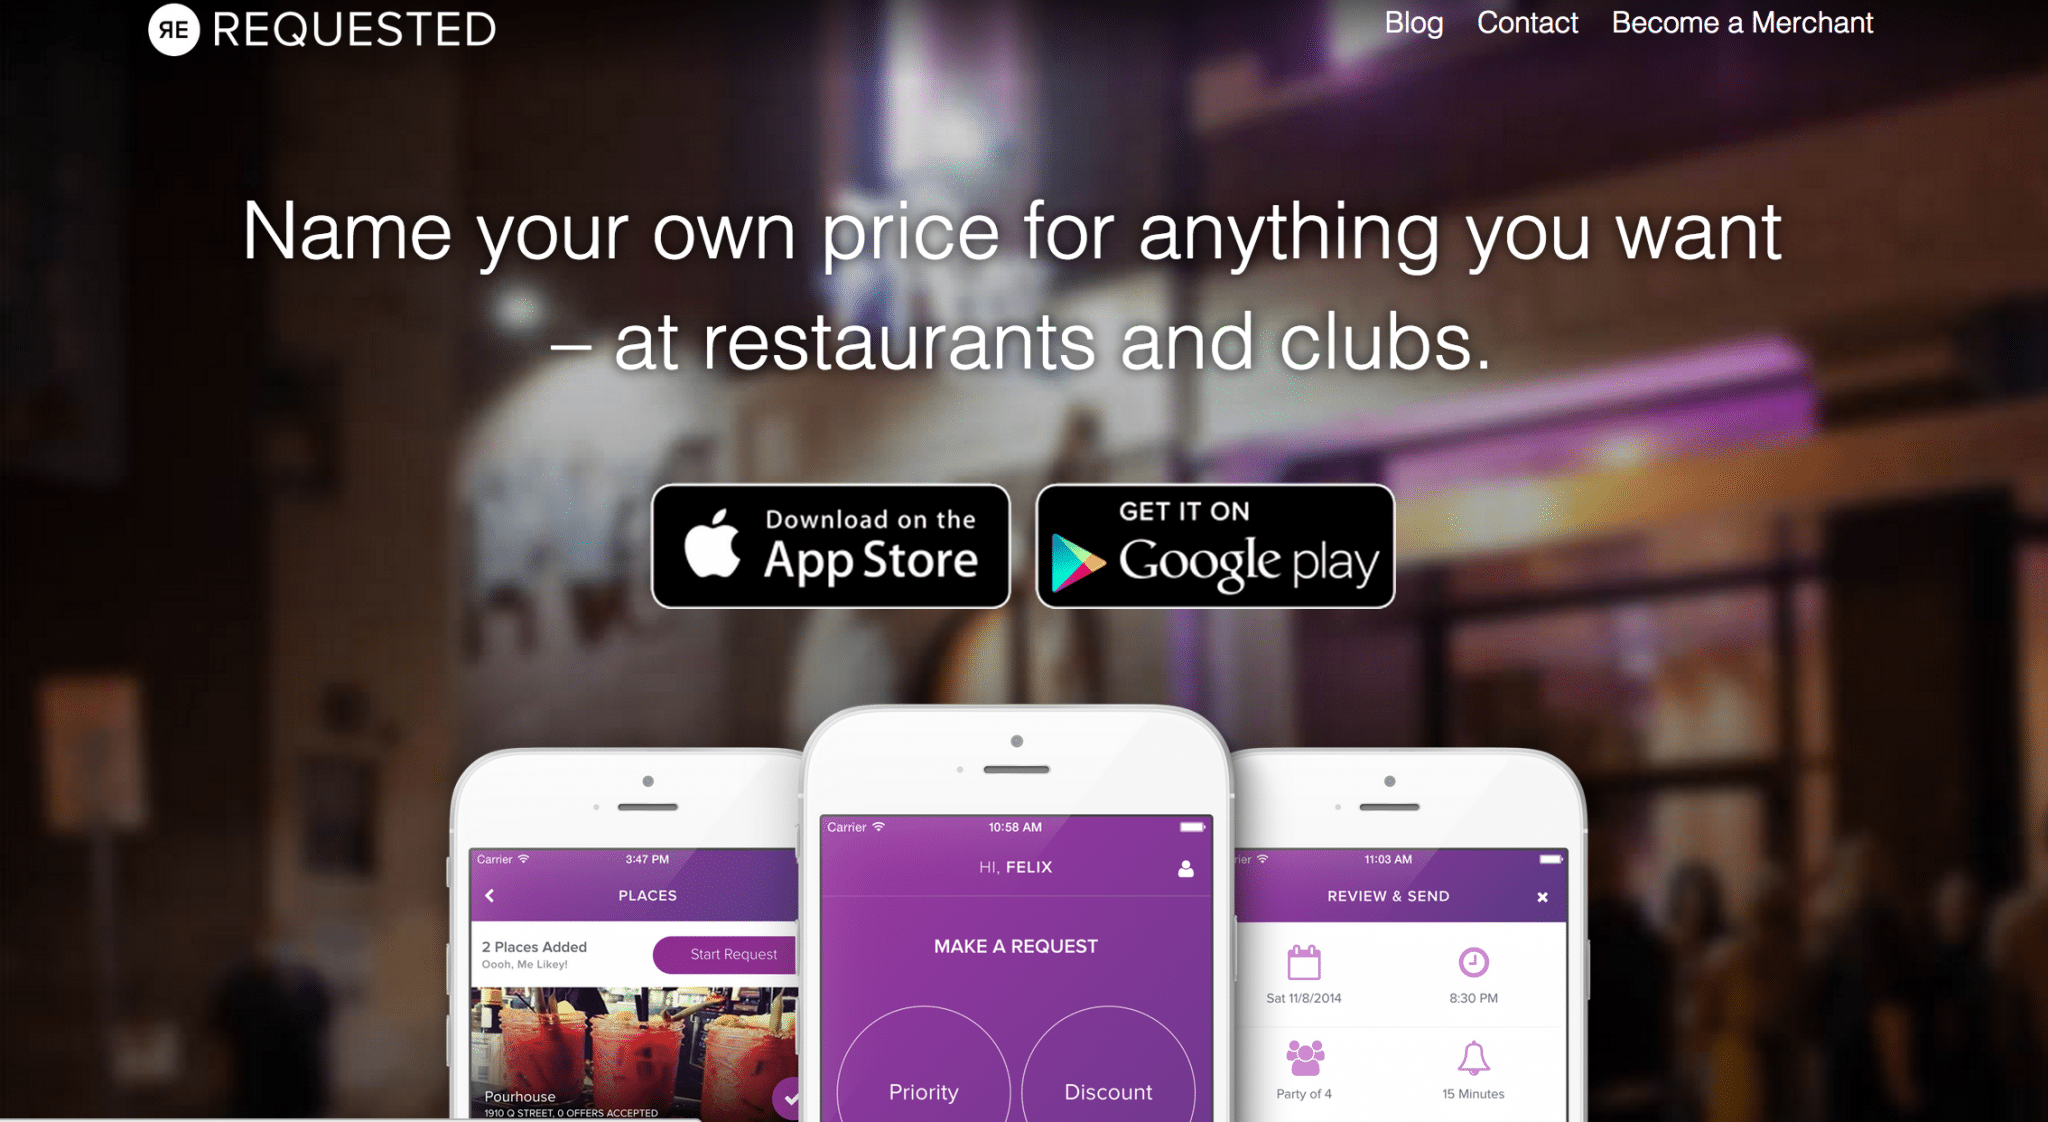 Requested is a mobile app you can use to name your price for anything you want at restaurants and clubs. The merchants on the other end can accept or deny your request.